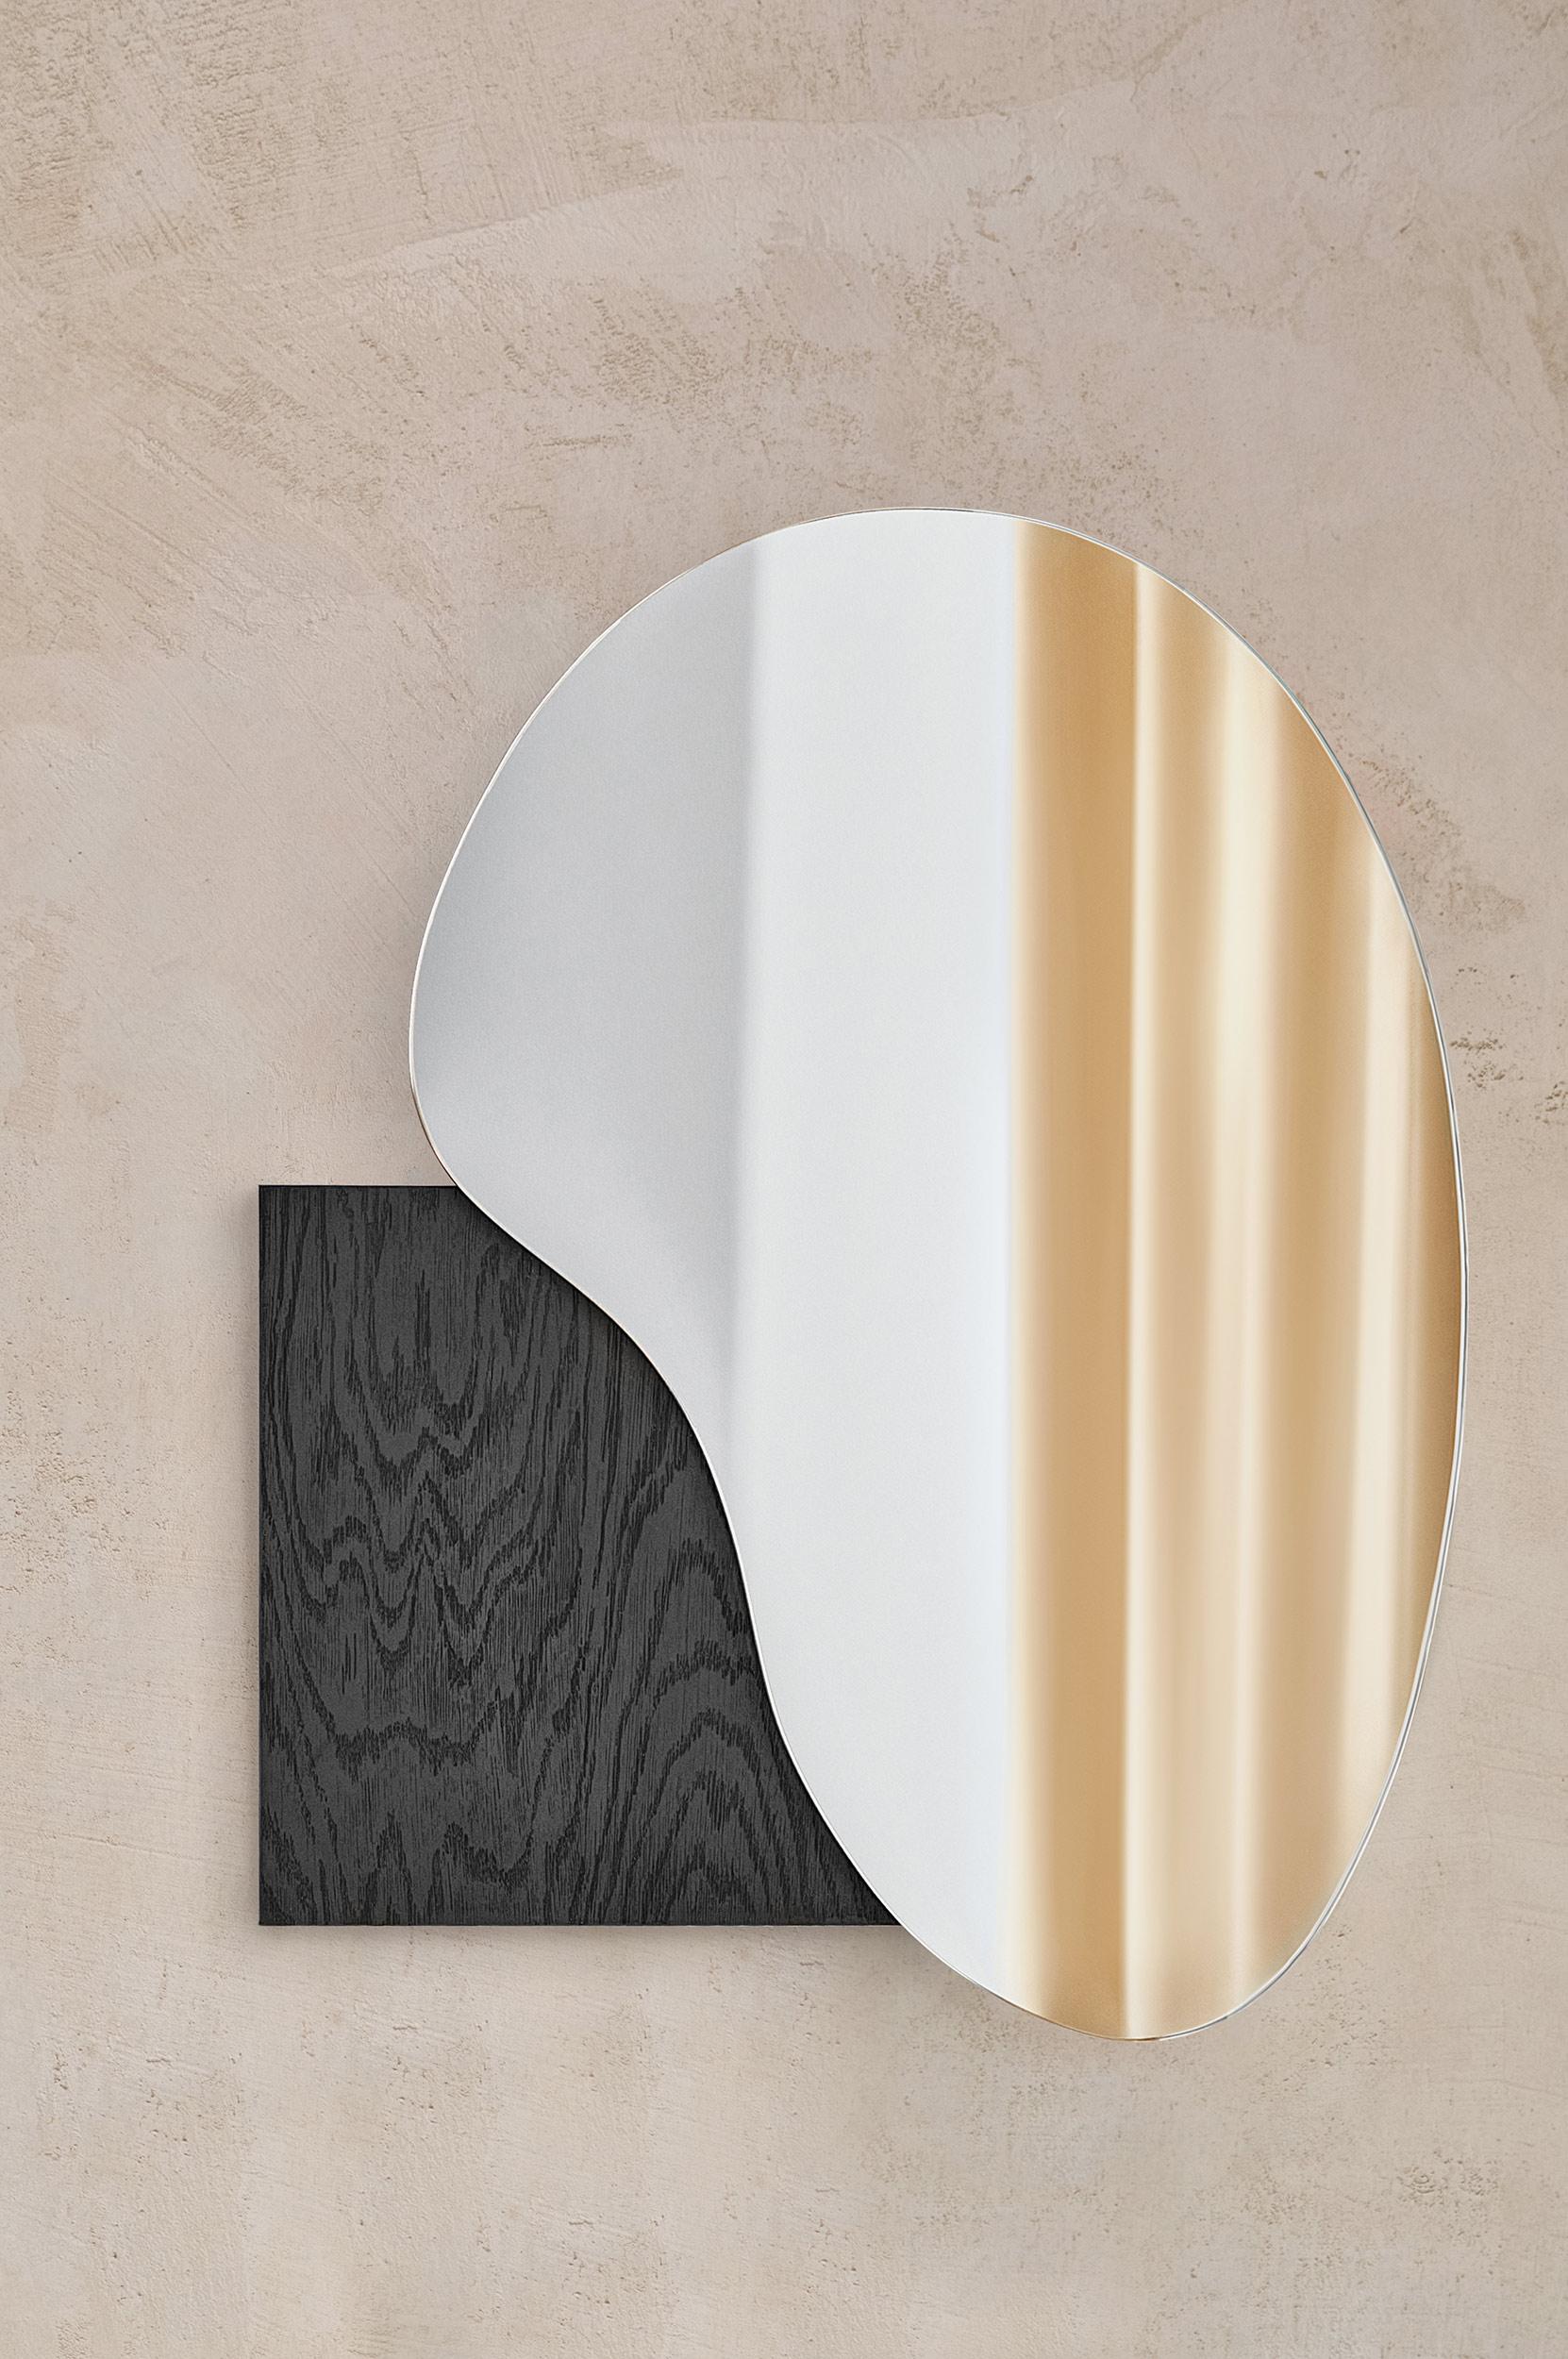 Painted Modern Wall Mirror Lake 4 by Noom with Madrone Veneered Wood Base